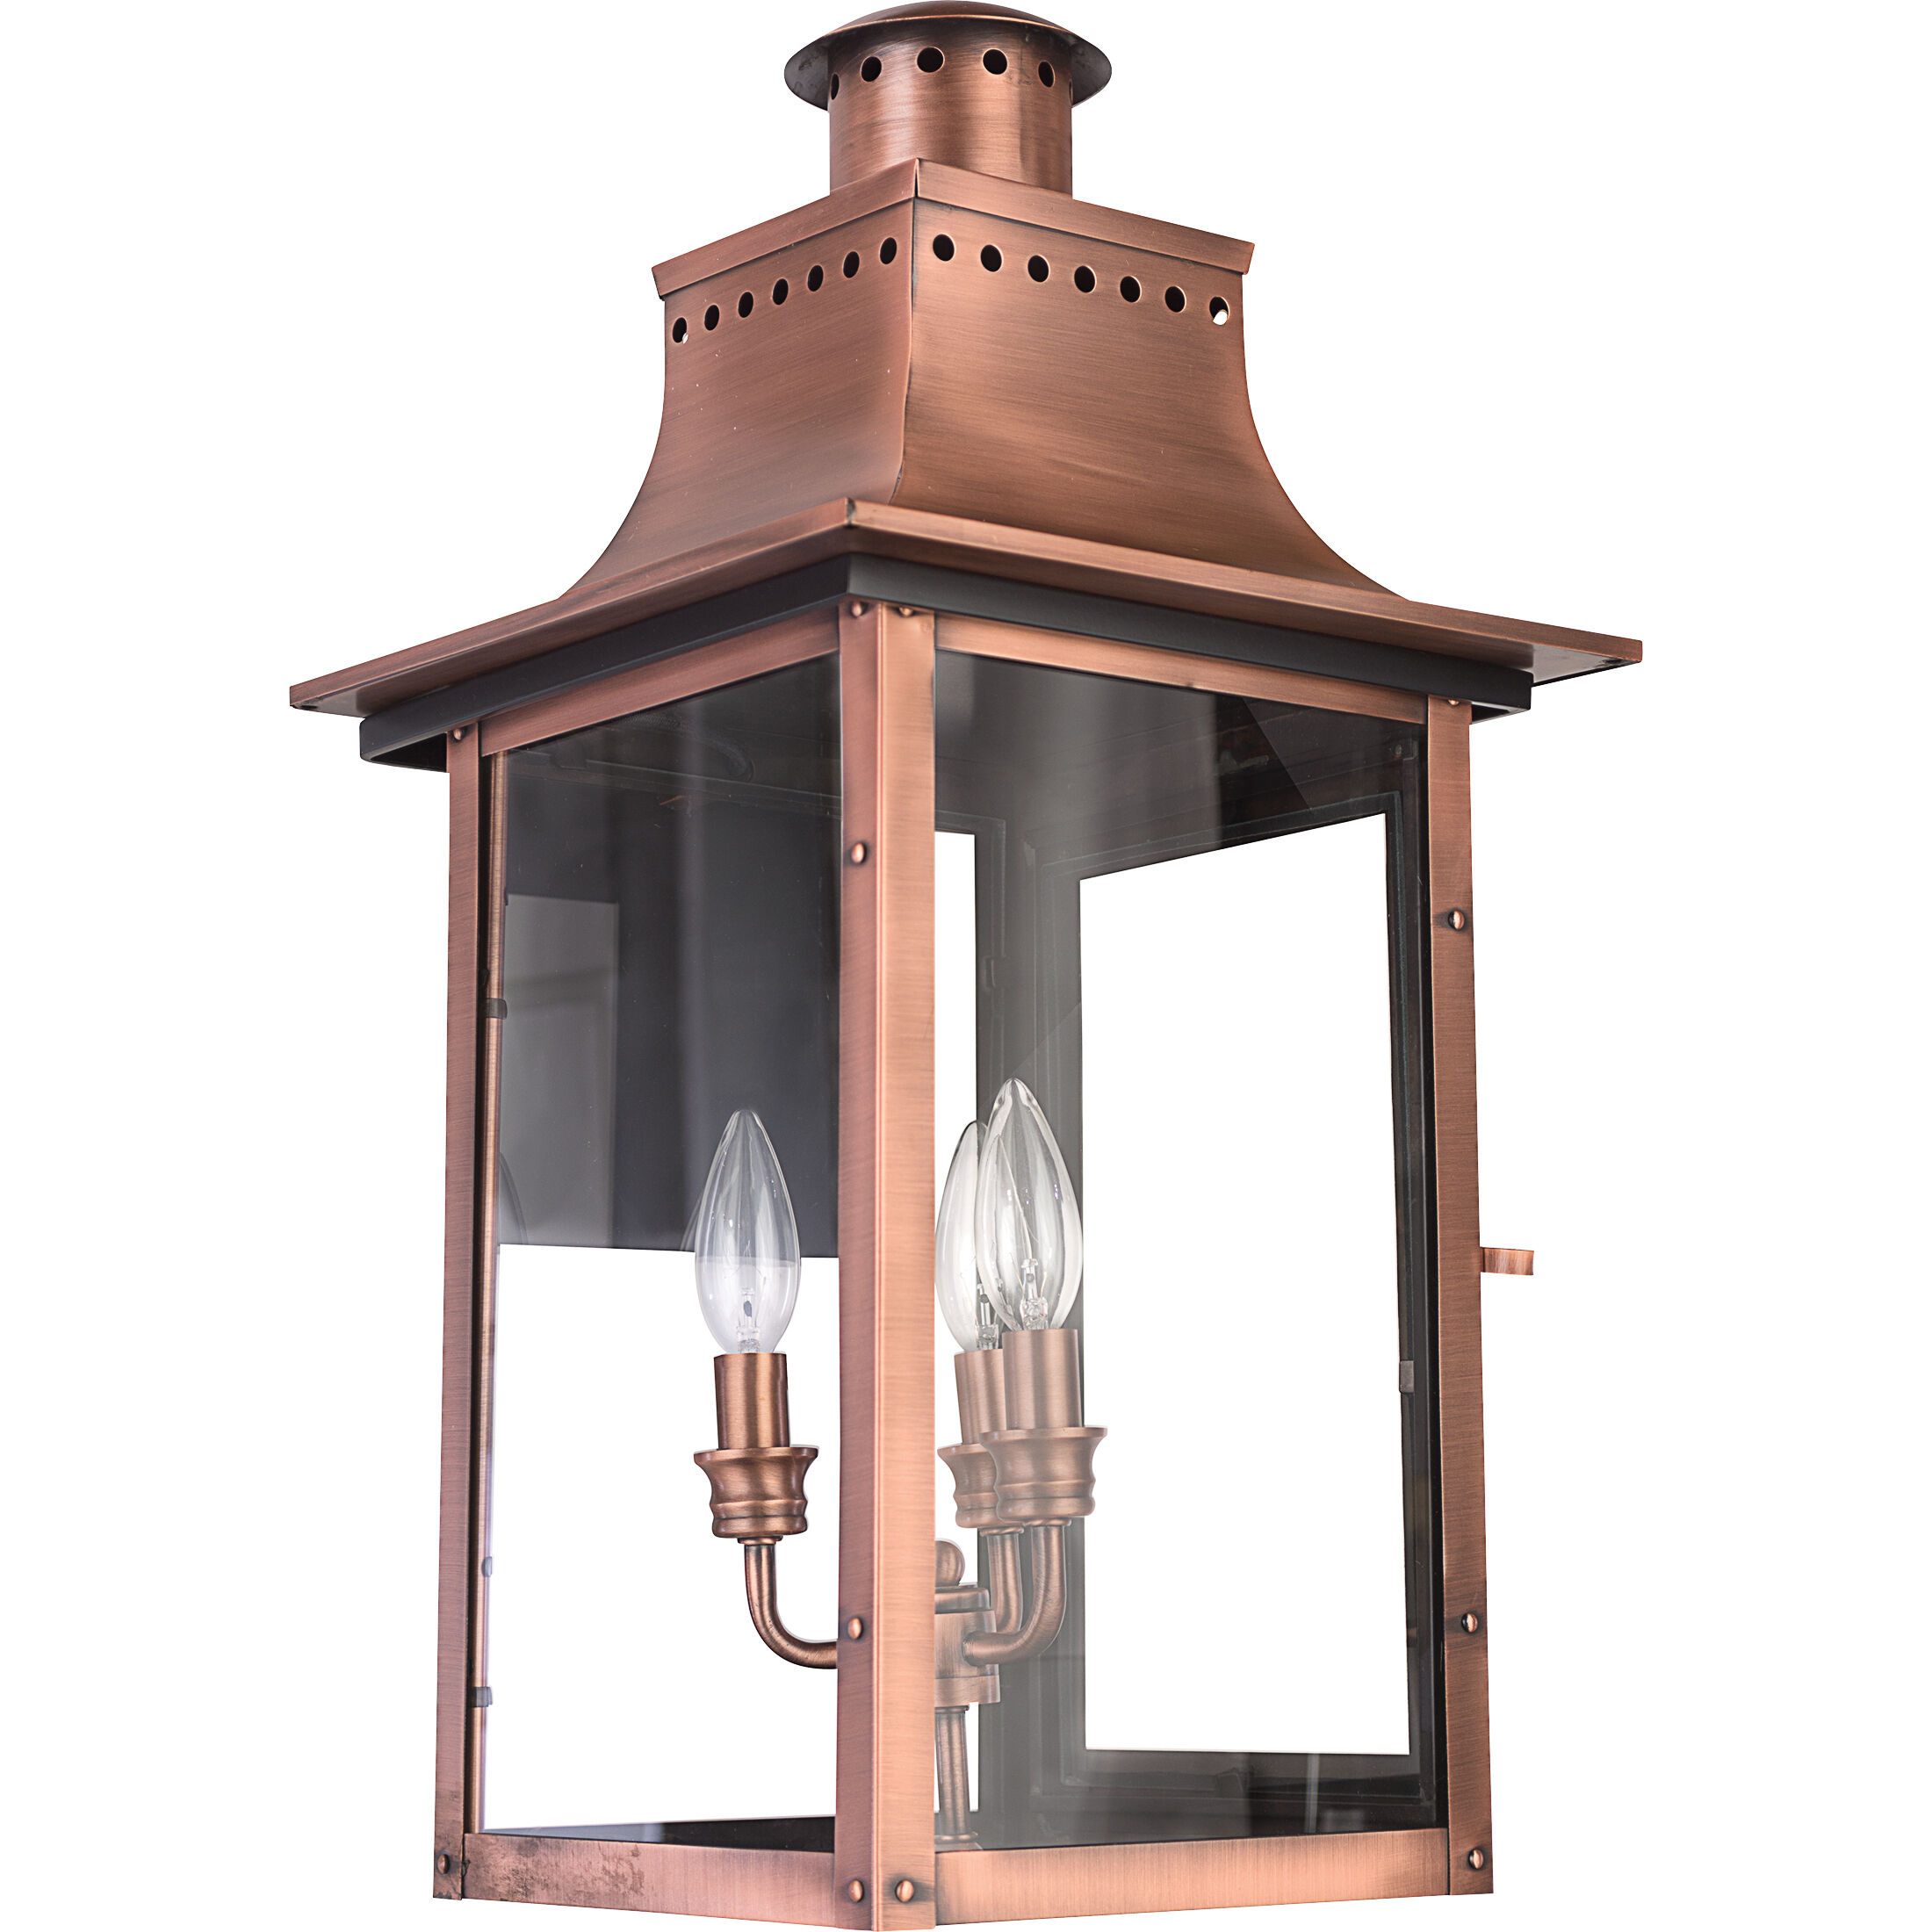 Quoizel Lighting Chalmers 3 Light Outdoor Wall Lantern in Aged